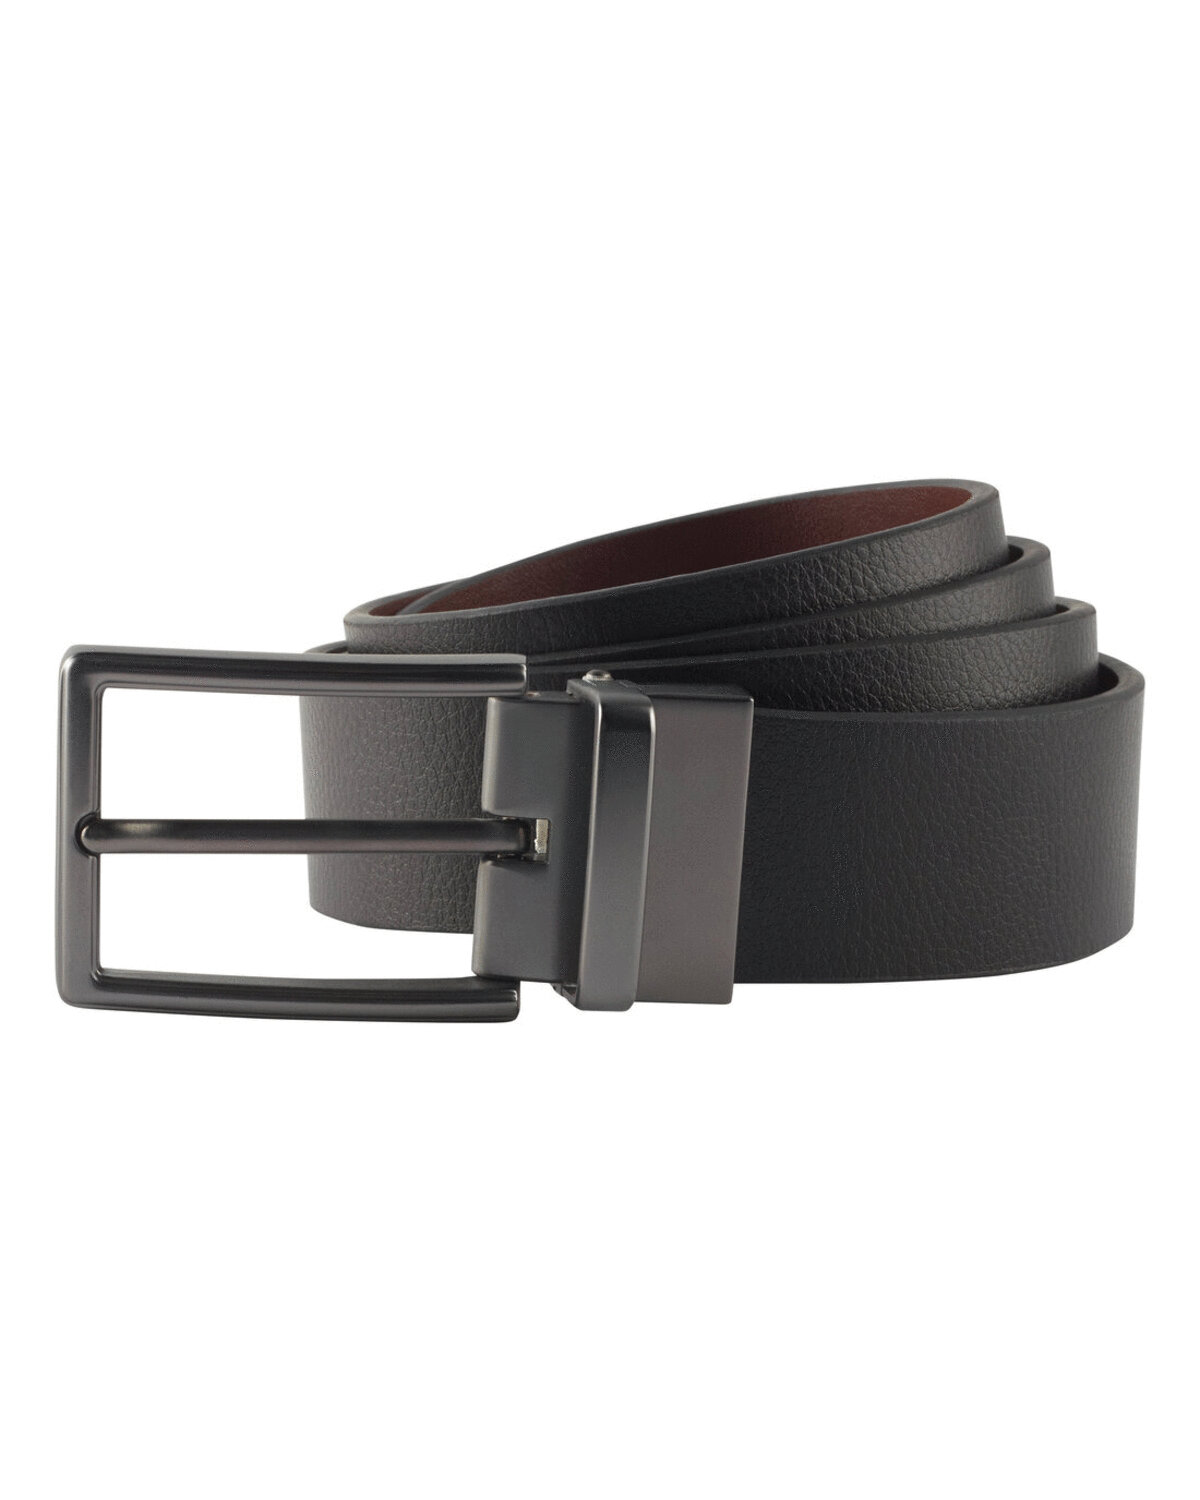 MENS TWO WAY LEATHER BELT